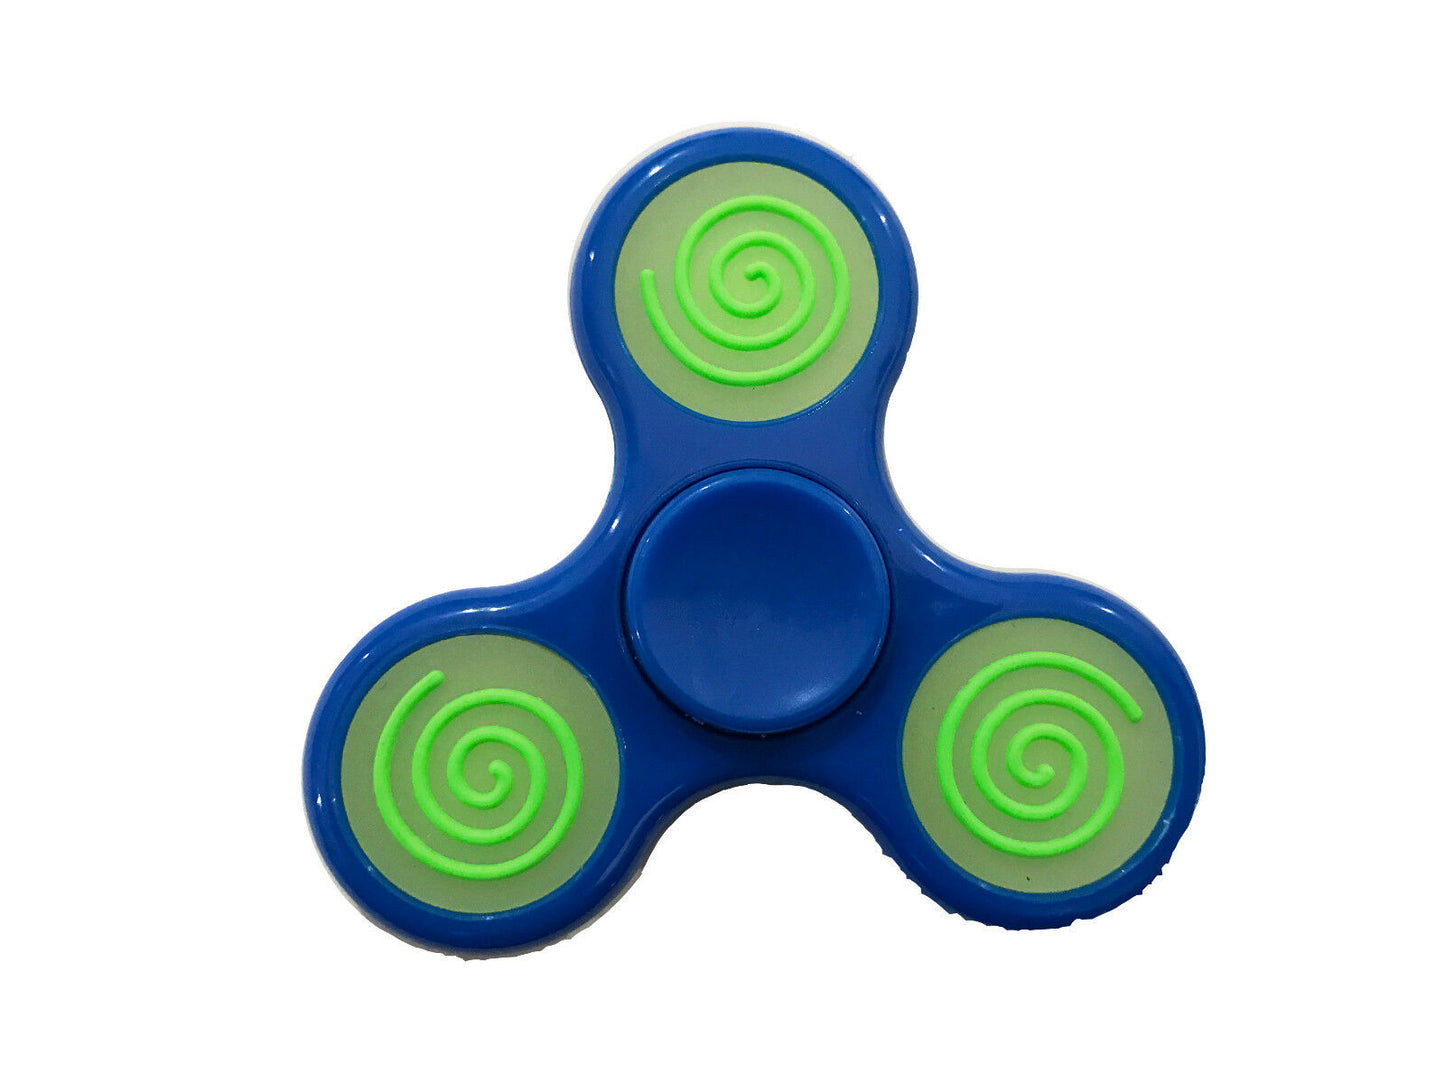 Glow In the Dark Fidget Spinners Finger Hand Tri-Spinner Kids Adults Focus Toys